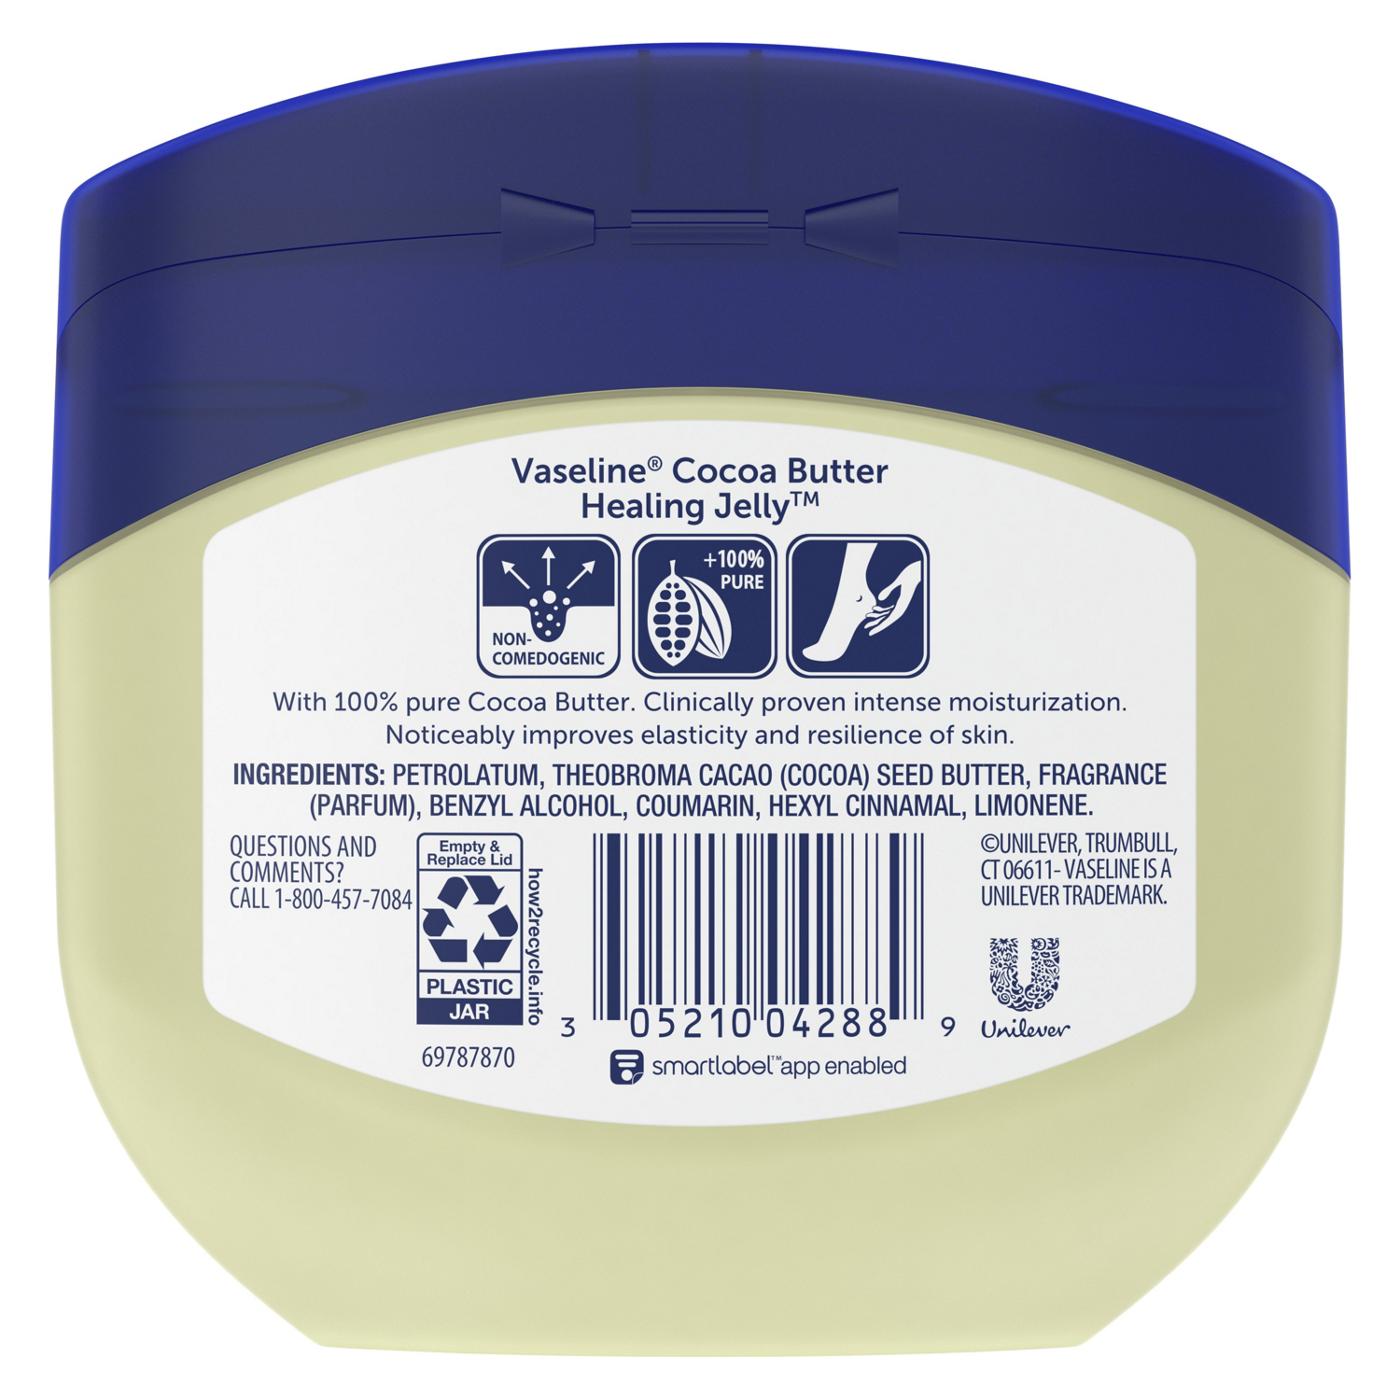 Vaseline Cocoa Butter Healing Jelly; image 3 of 4